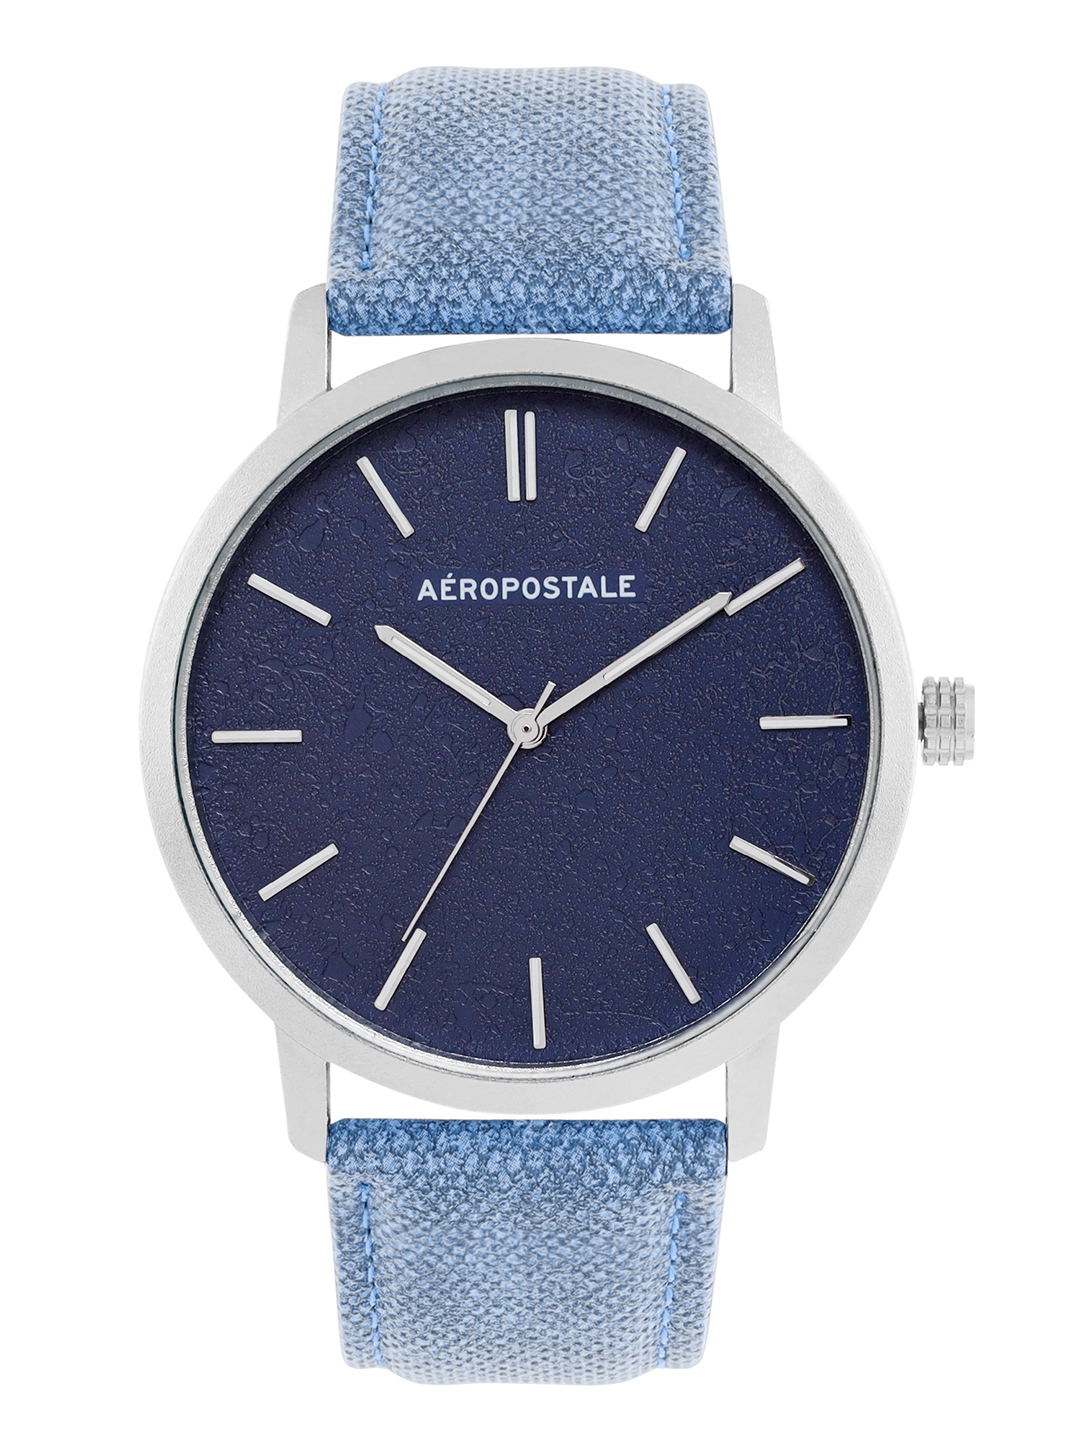 Aeropostale "AERO_AW_A41_BLU" Classic Men’s Analog Quartz Wrist Watch, Metal Alloy Silver case, Classic Navy Blue Dial with contrasting silver hand,  Blue wrist Band Water resistant 3.0 ATM